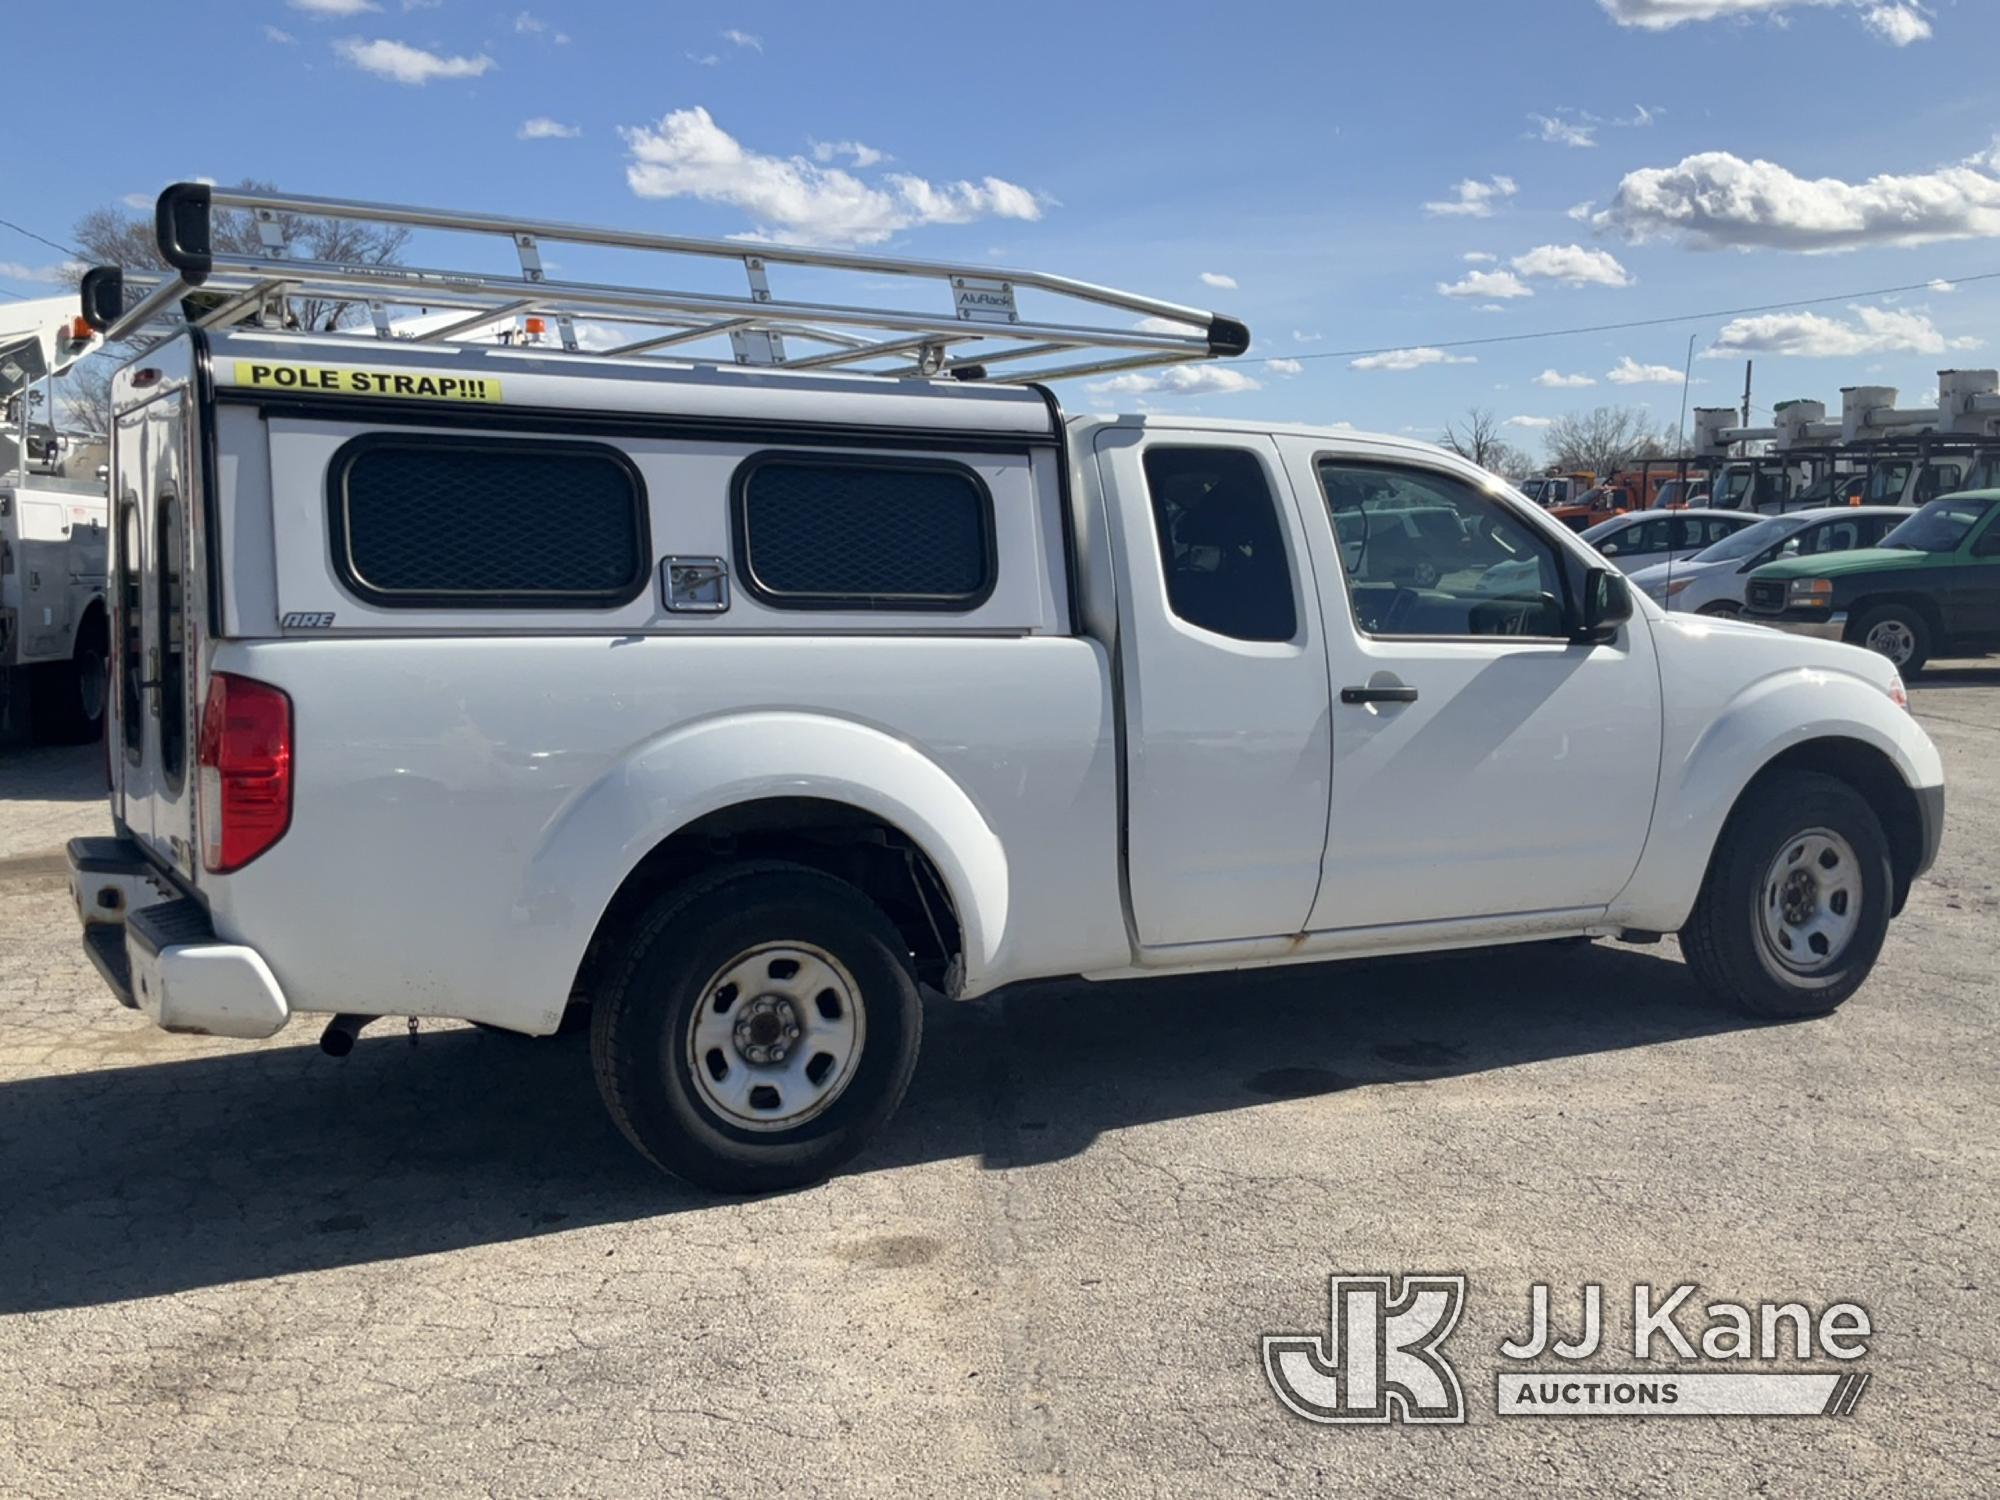 (South Beloit, IL) 2017 Nissan Frontier Extended-Cab Pickup Truck Runs, Moves, Paint Damage